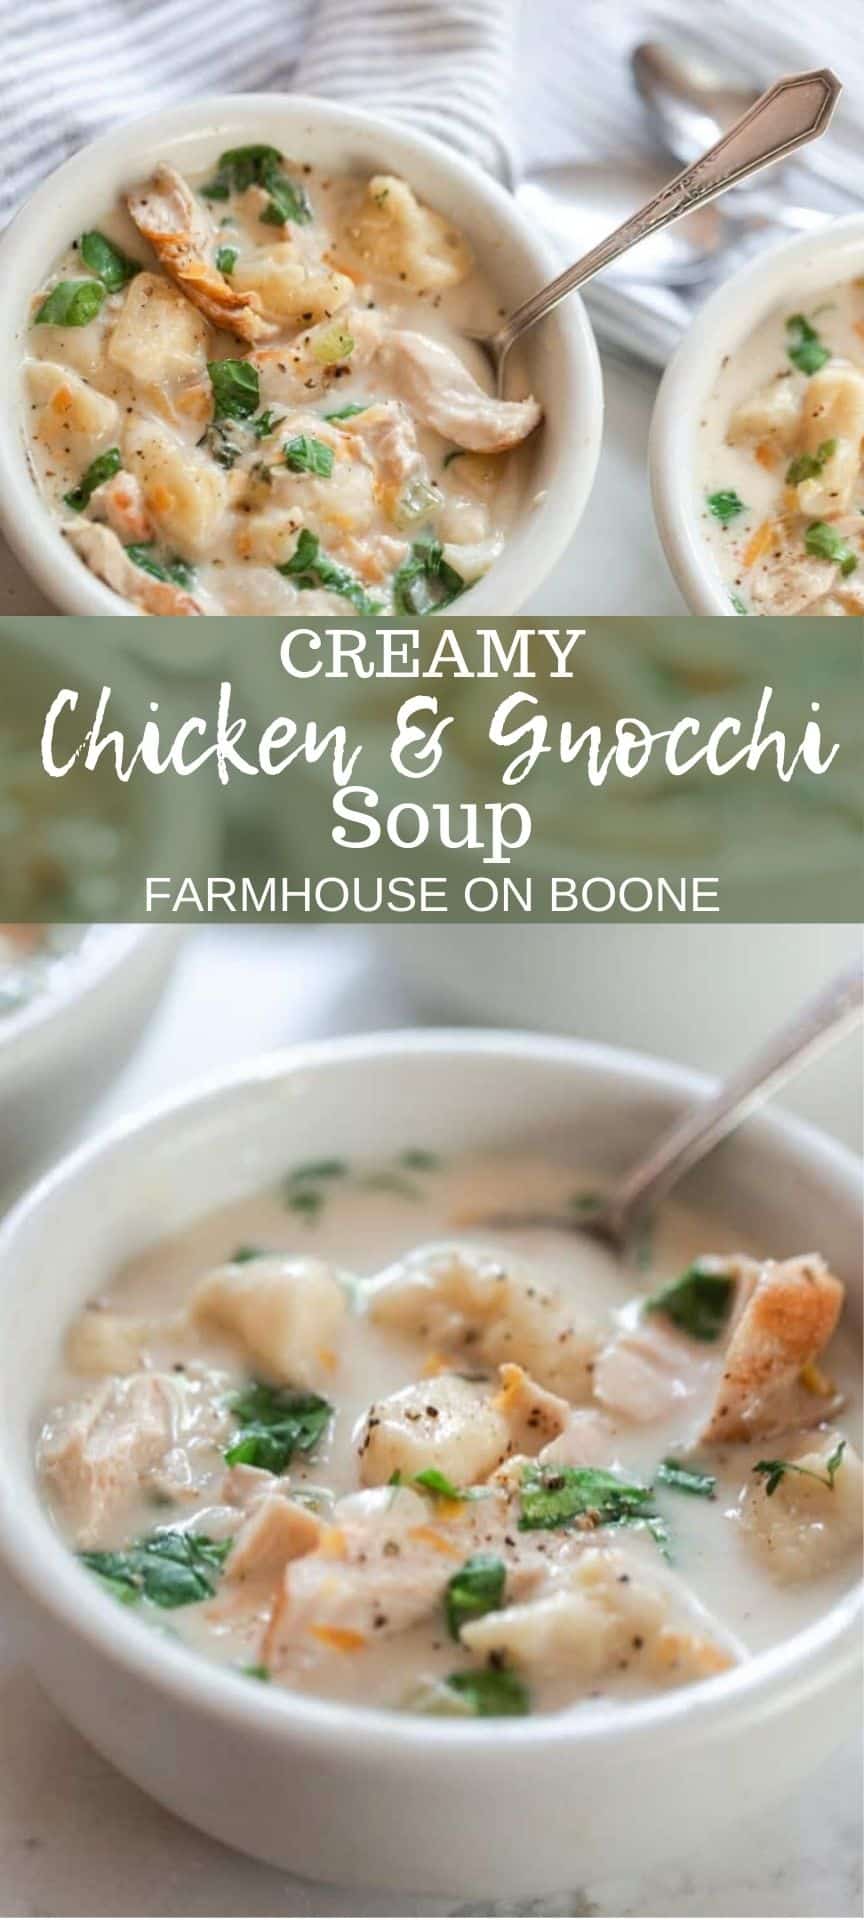 Homemade Creamy Chicken And Gnocchi Soup - Farmhouse on Boone